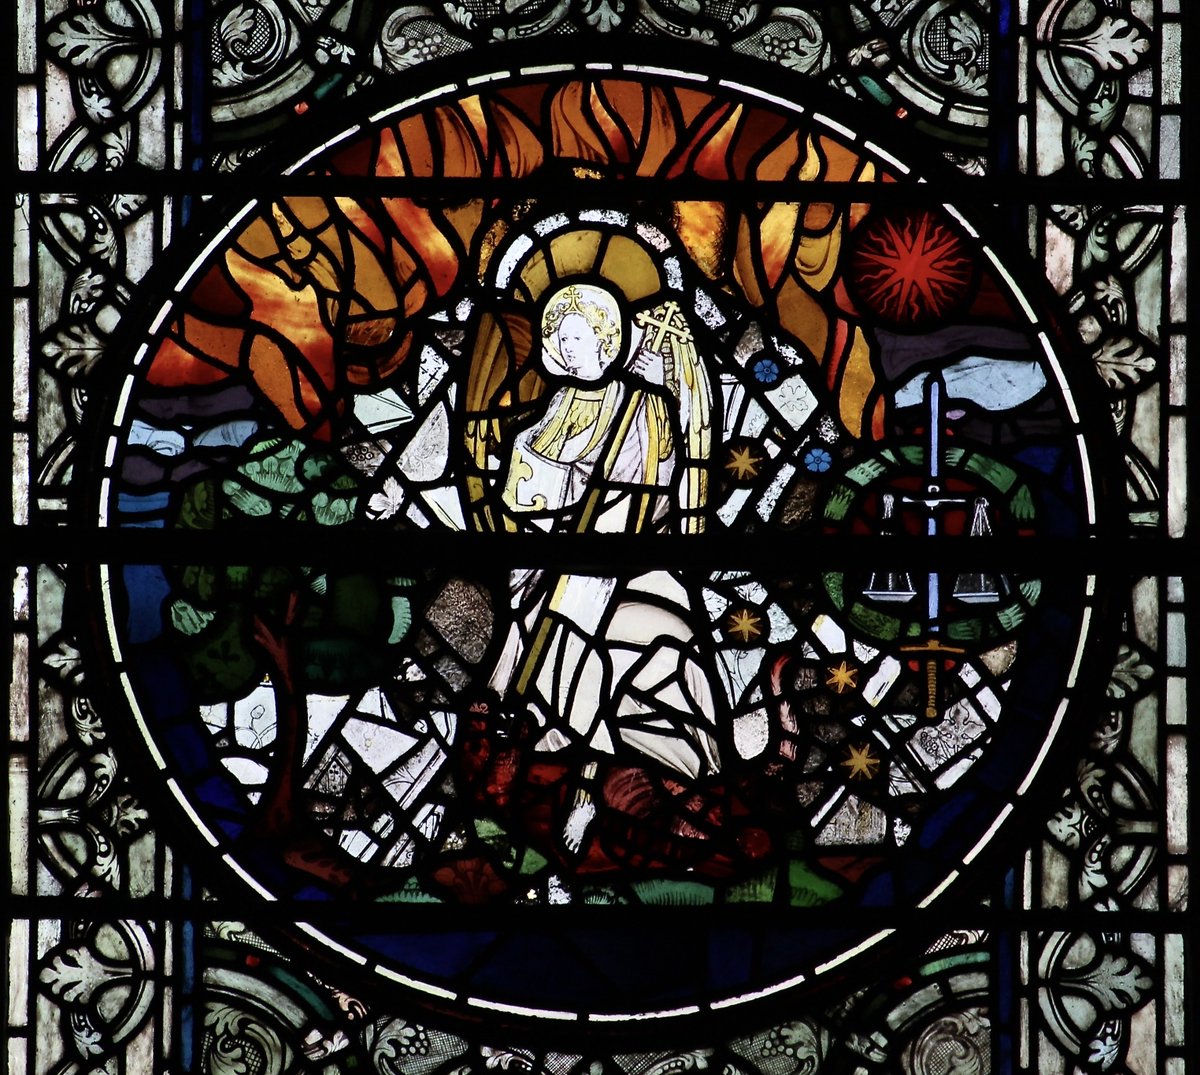 #Michaelmas 

A dramatic depiction of St Michael for the Feast of St Michael and All Angels! This is one recreated from #Medieval #StainedGlass fragments @York_Minster, I love the apocalyptic sky of flames behind the angel, emphasised by the falling stars. 

#StainedGlassEveryday